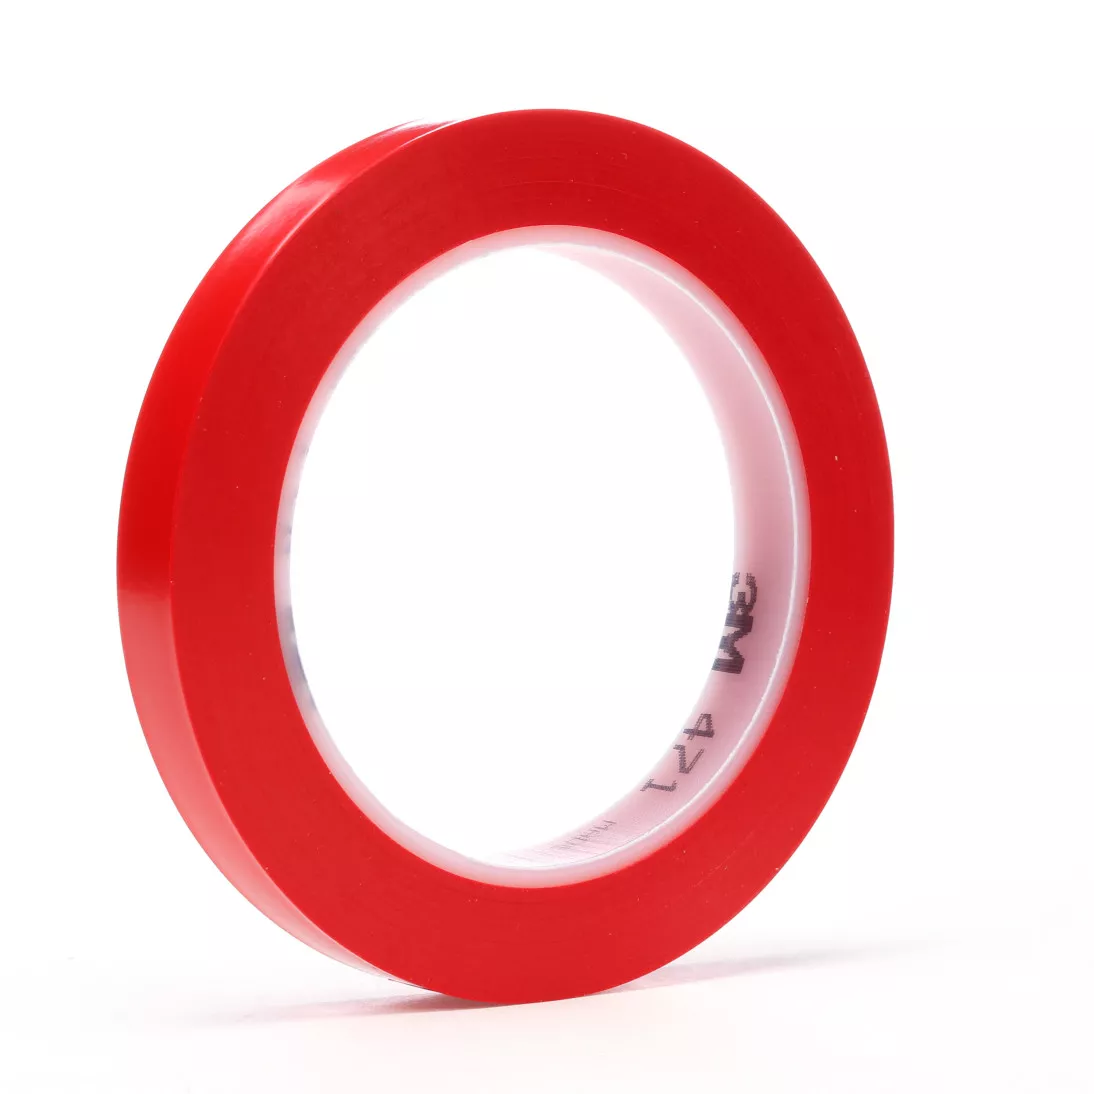 3M™ Vinyl Tape 471, Red, 1/2 in x 36 yd, 5.2 mil, 72 rolls per case,
Individually Wrapped Conveniently Packaged